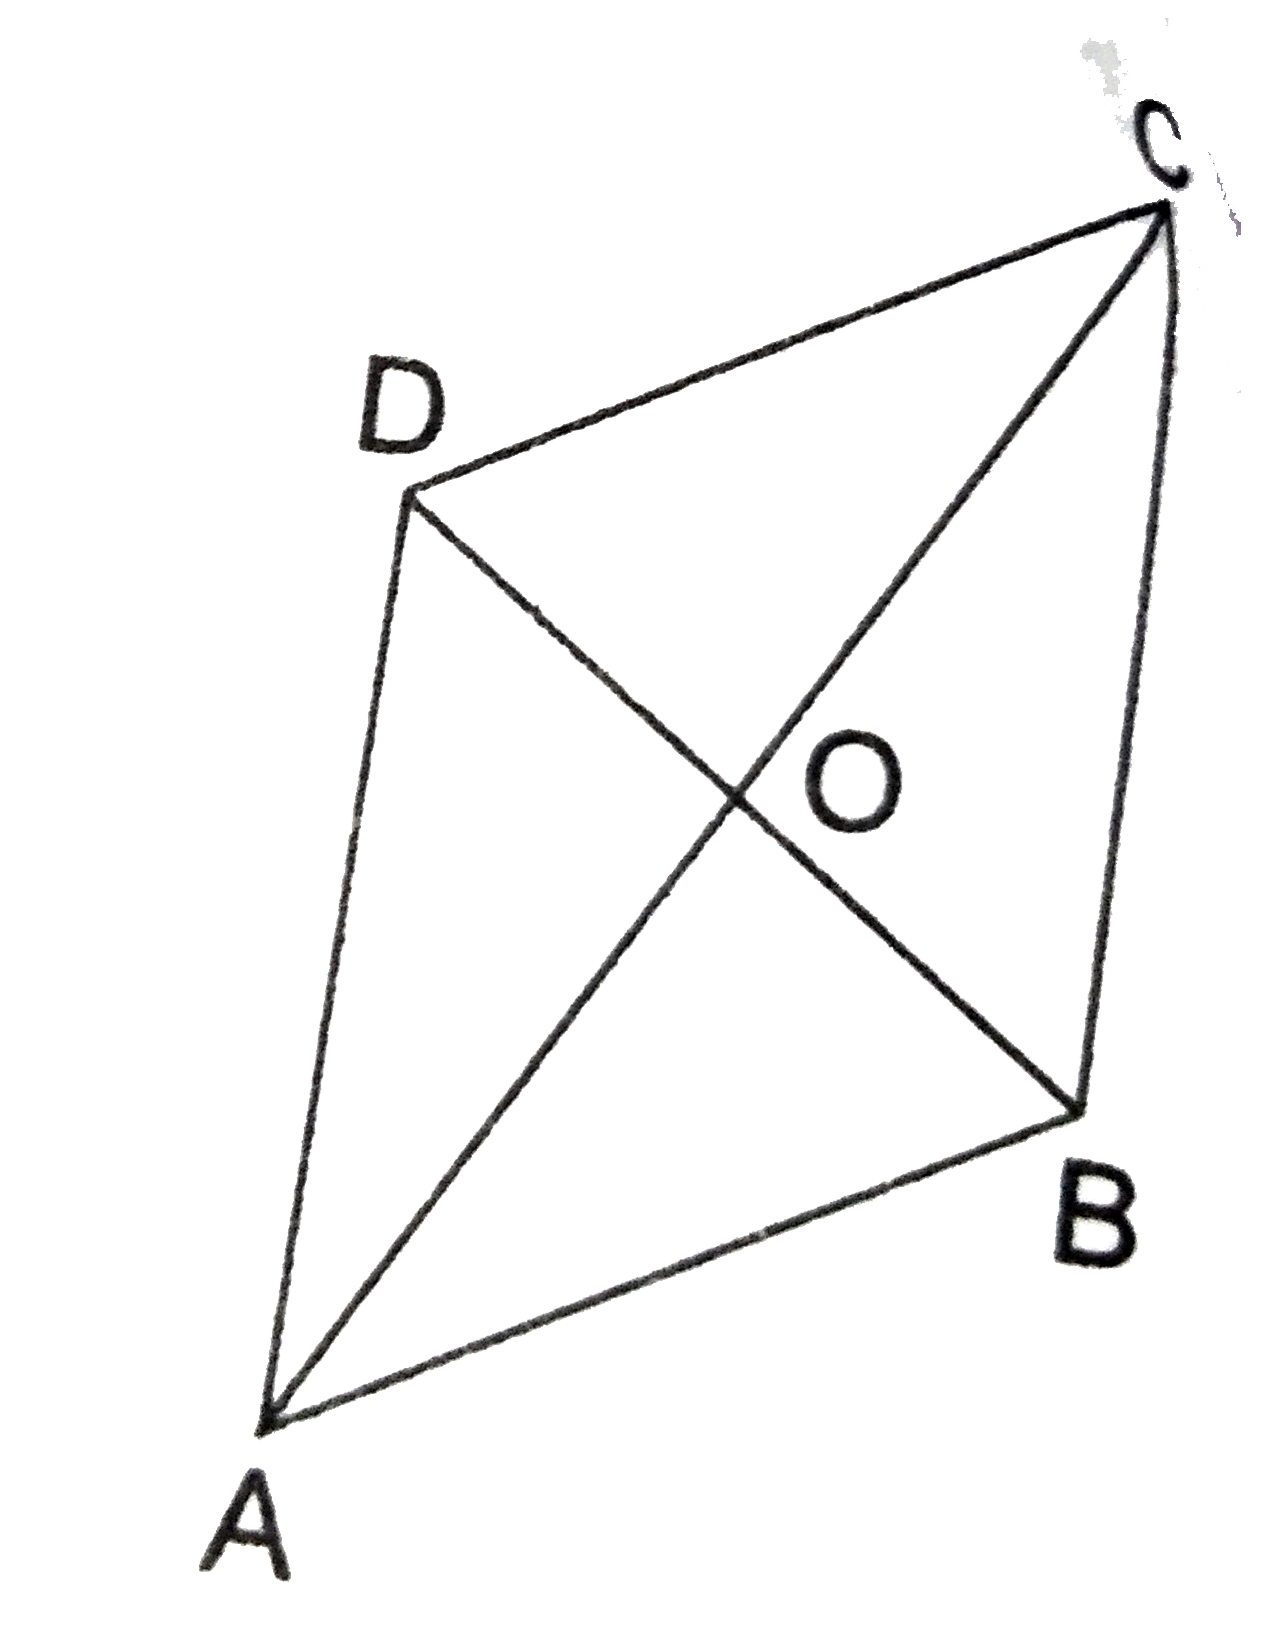 ABCD is a rhombus in which angleC= 60^(@)then AC:BD=.